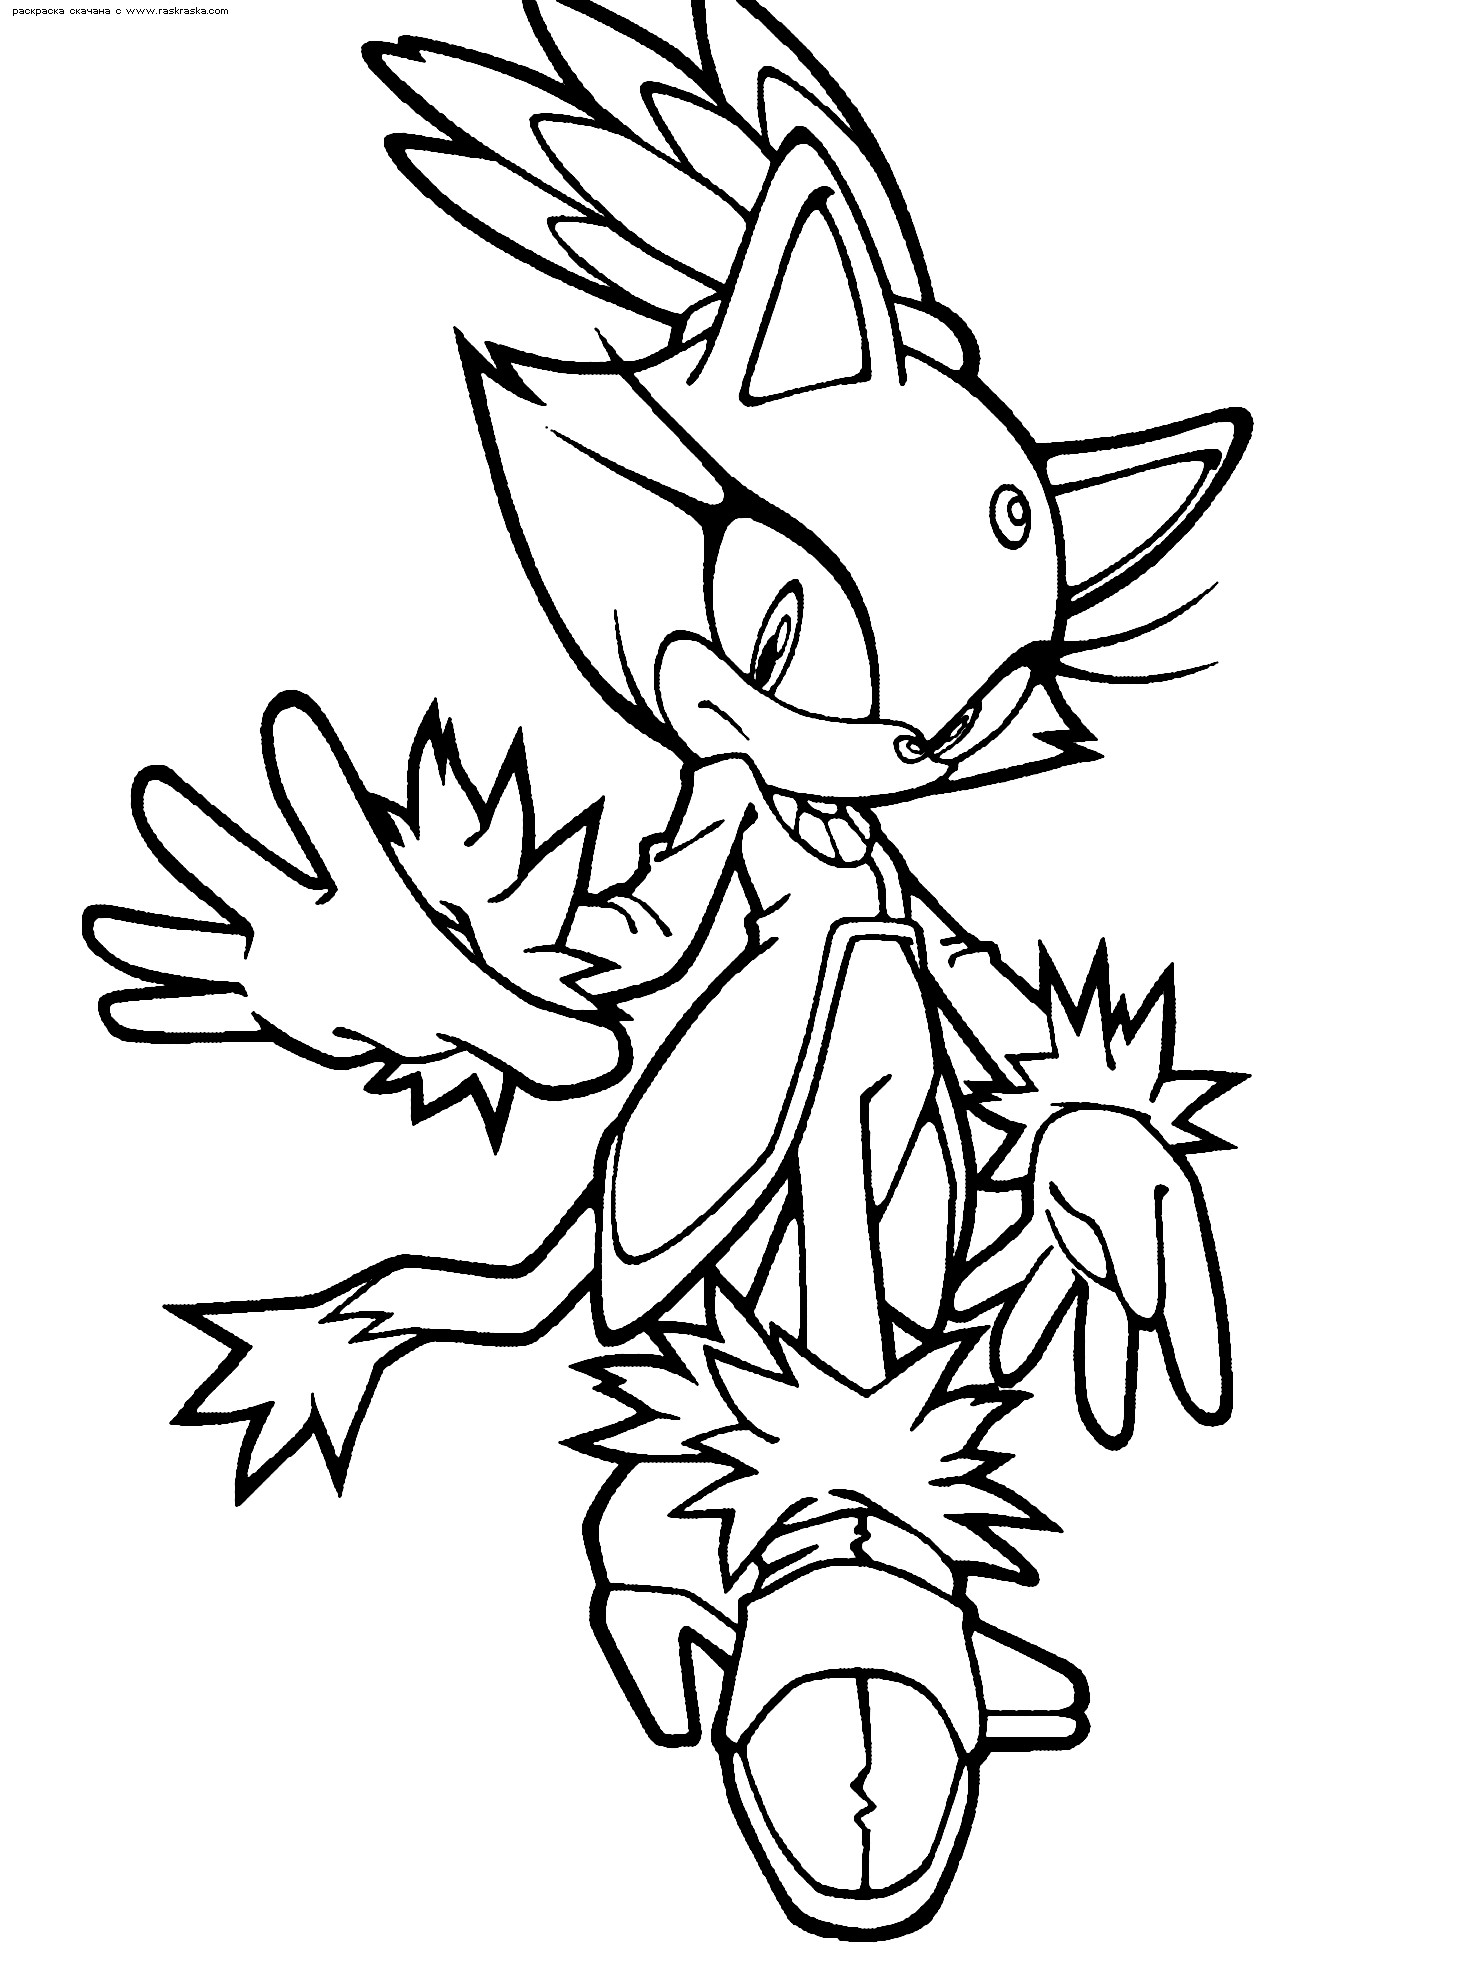 Printable Coloring Pages For Children
 Free Printable Sonic The Hedgehog Coloring Pages For Kids